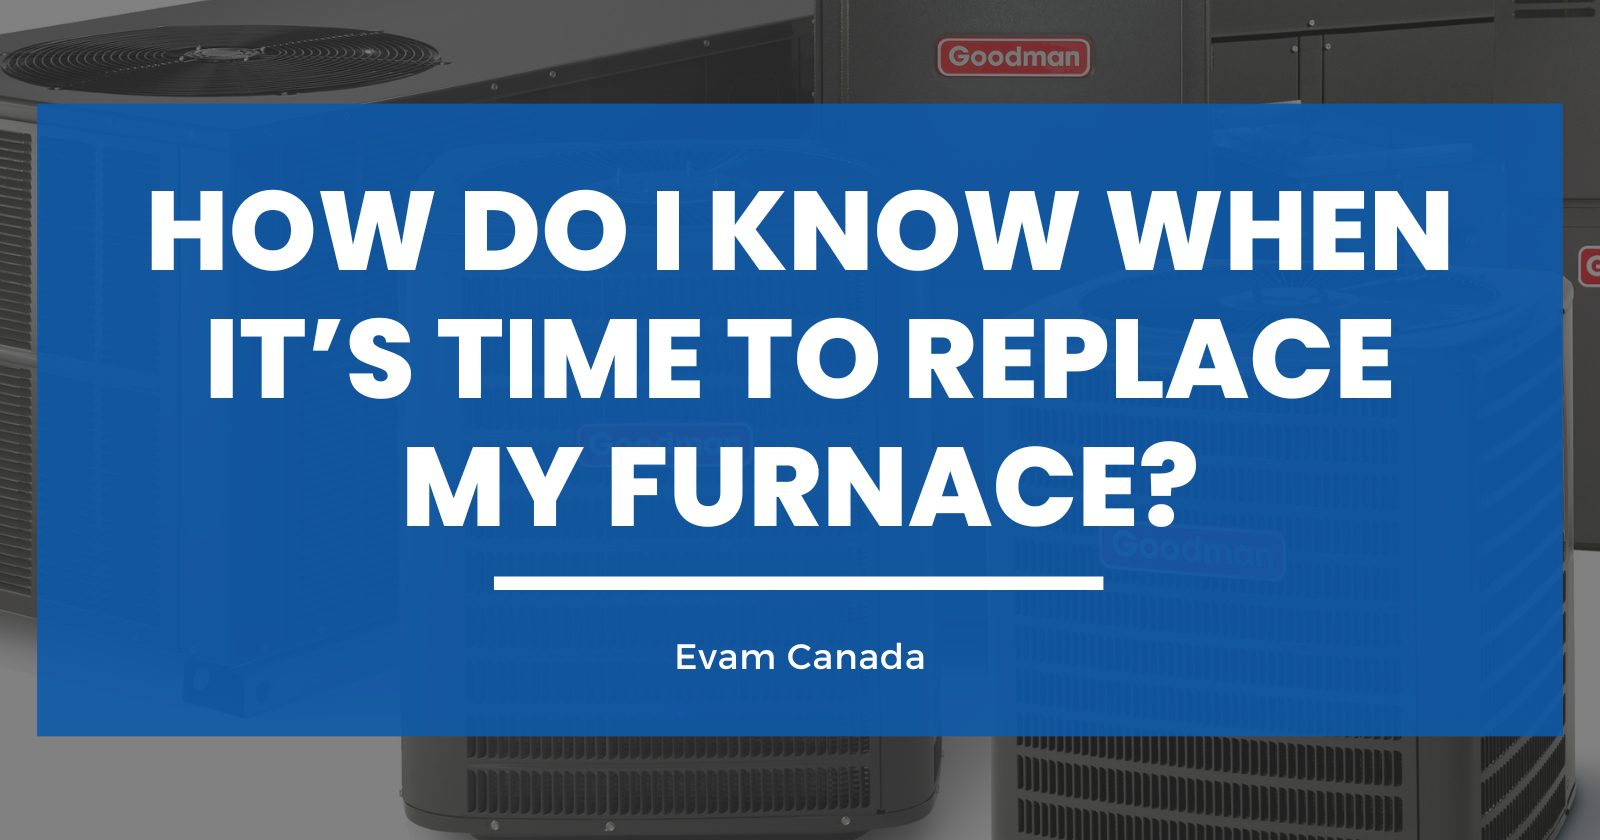 How Do I Know When it’s Time to Replace My Furnace?